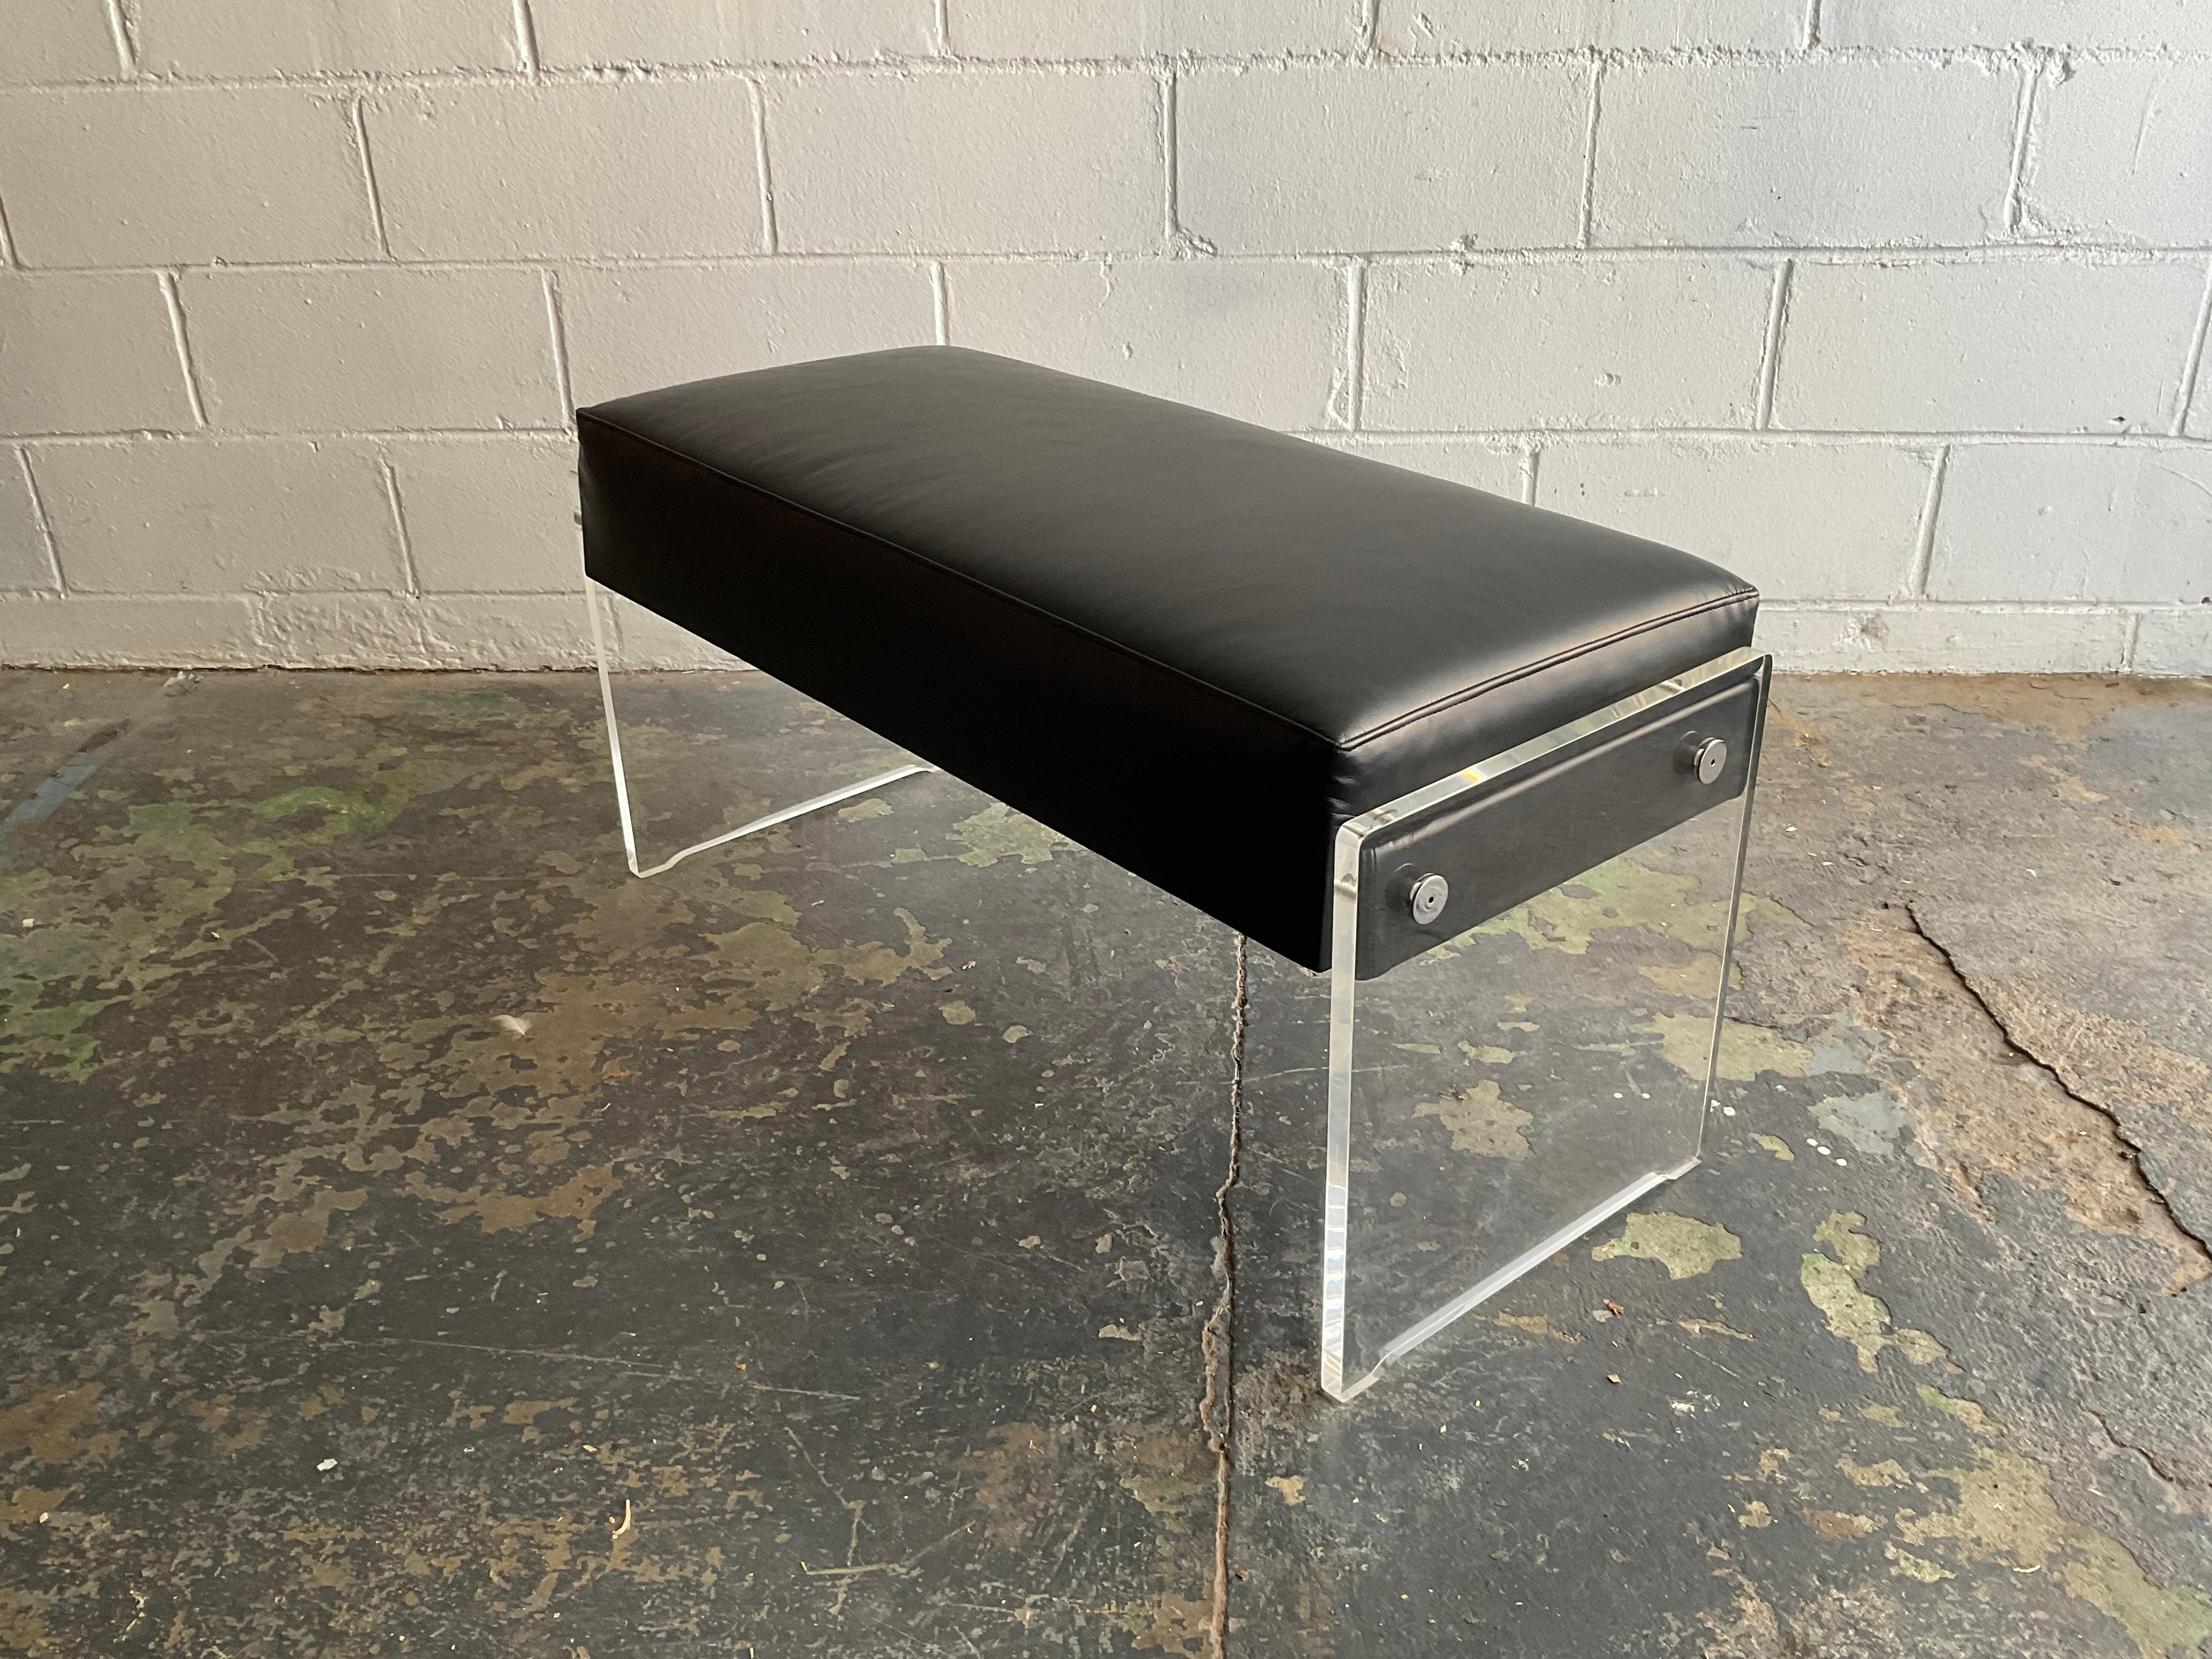 Supremely useful and attractive modern piano or storage bench in lucite with chrome hardware upholstered in a full grain black Italian leather—circa 1980, appearing to be a custom fabrication. Excellent proportions, commodious storage compartment